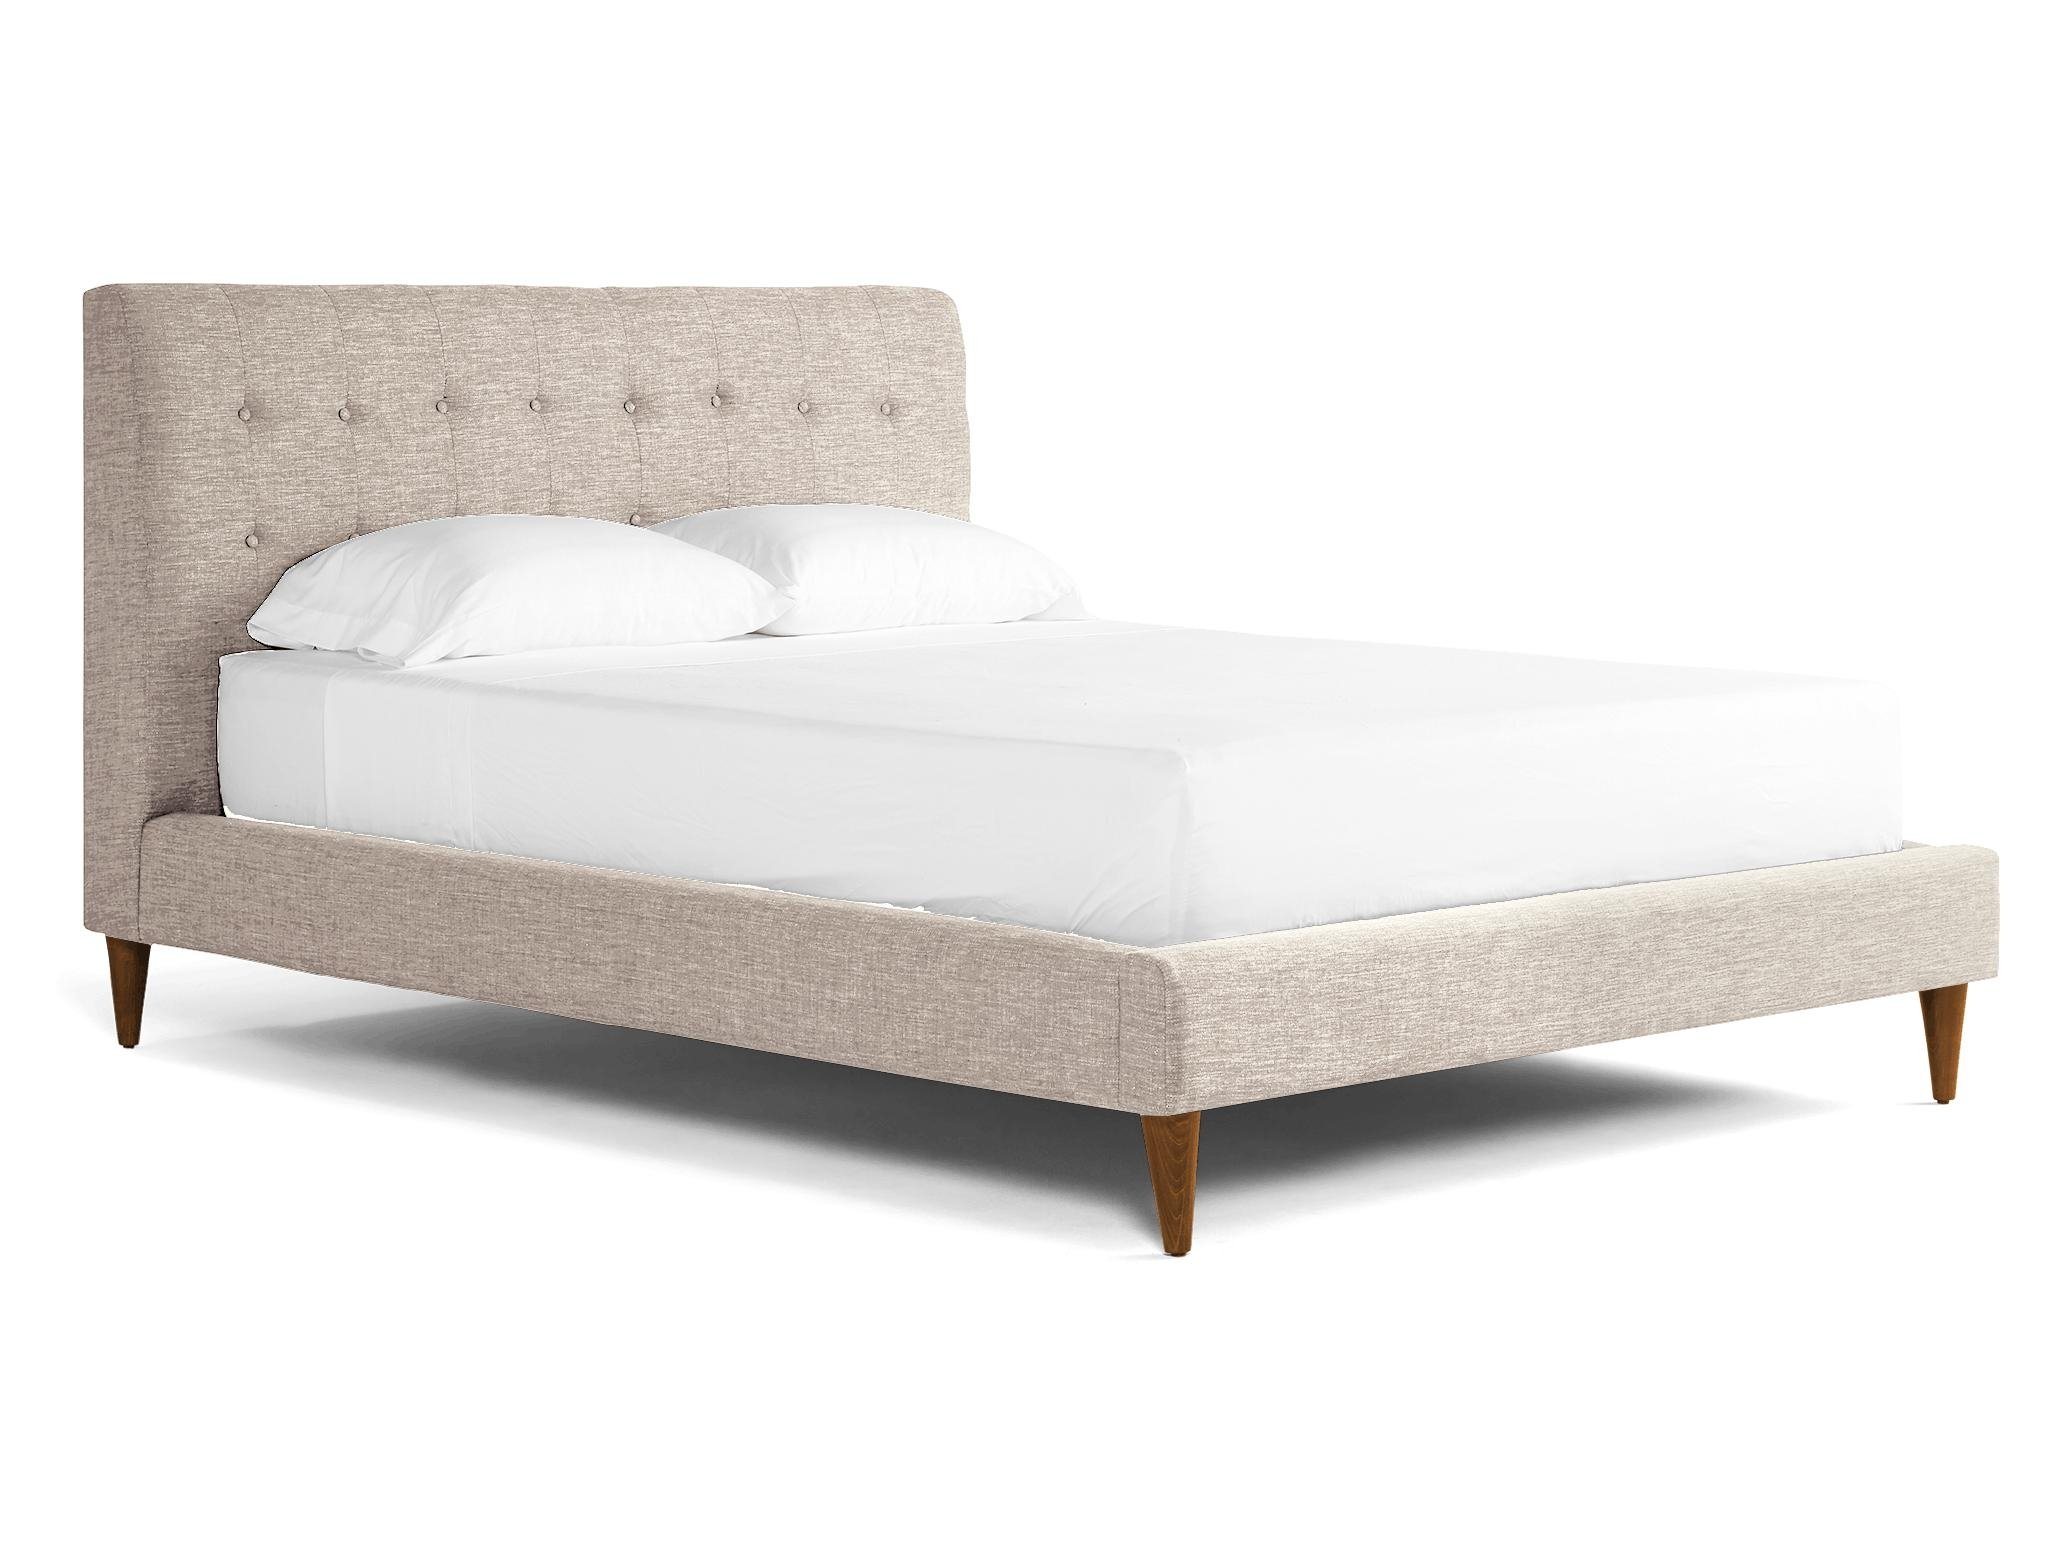 White Eliot Mid Century Modern Bed - Nico Oyster - Mocha - Queen - Image 1